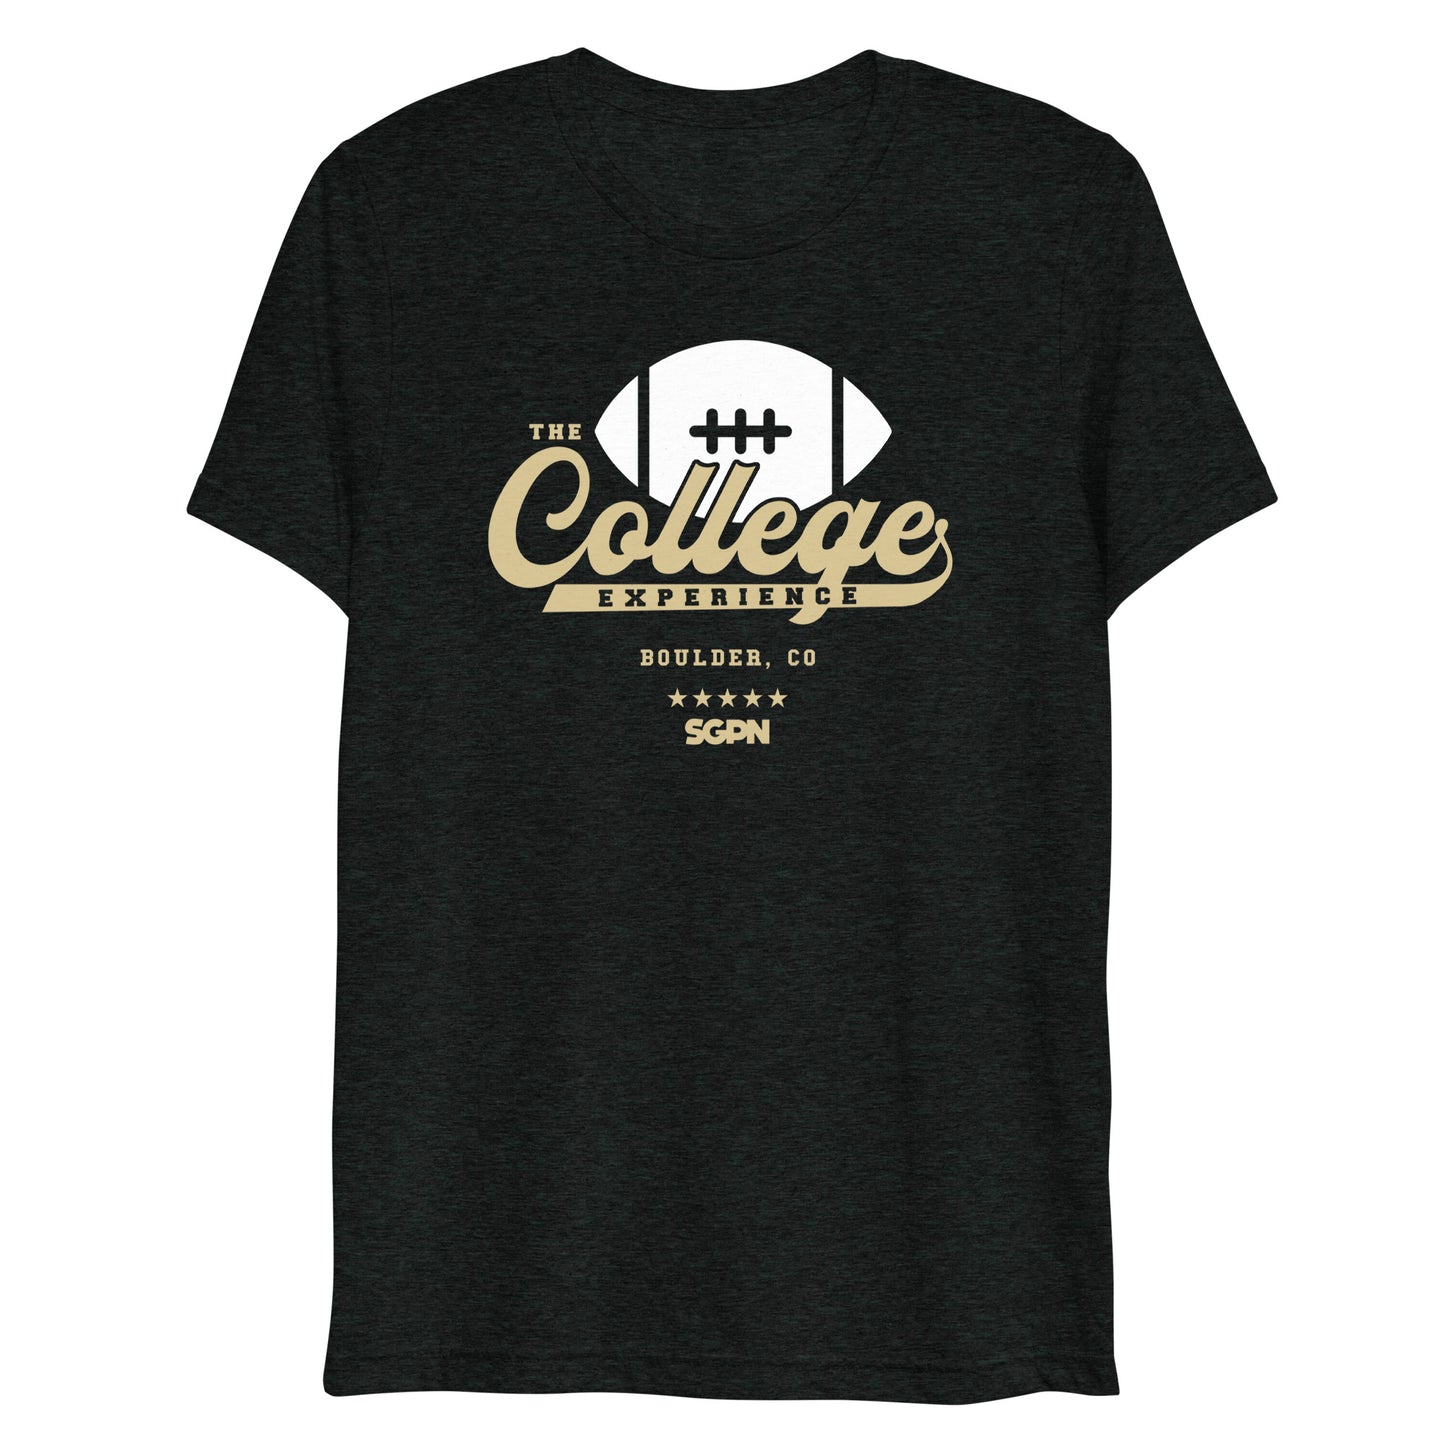 The College Football Experience - Boulder edition - Charcoal Black Short sleeve t-shirt